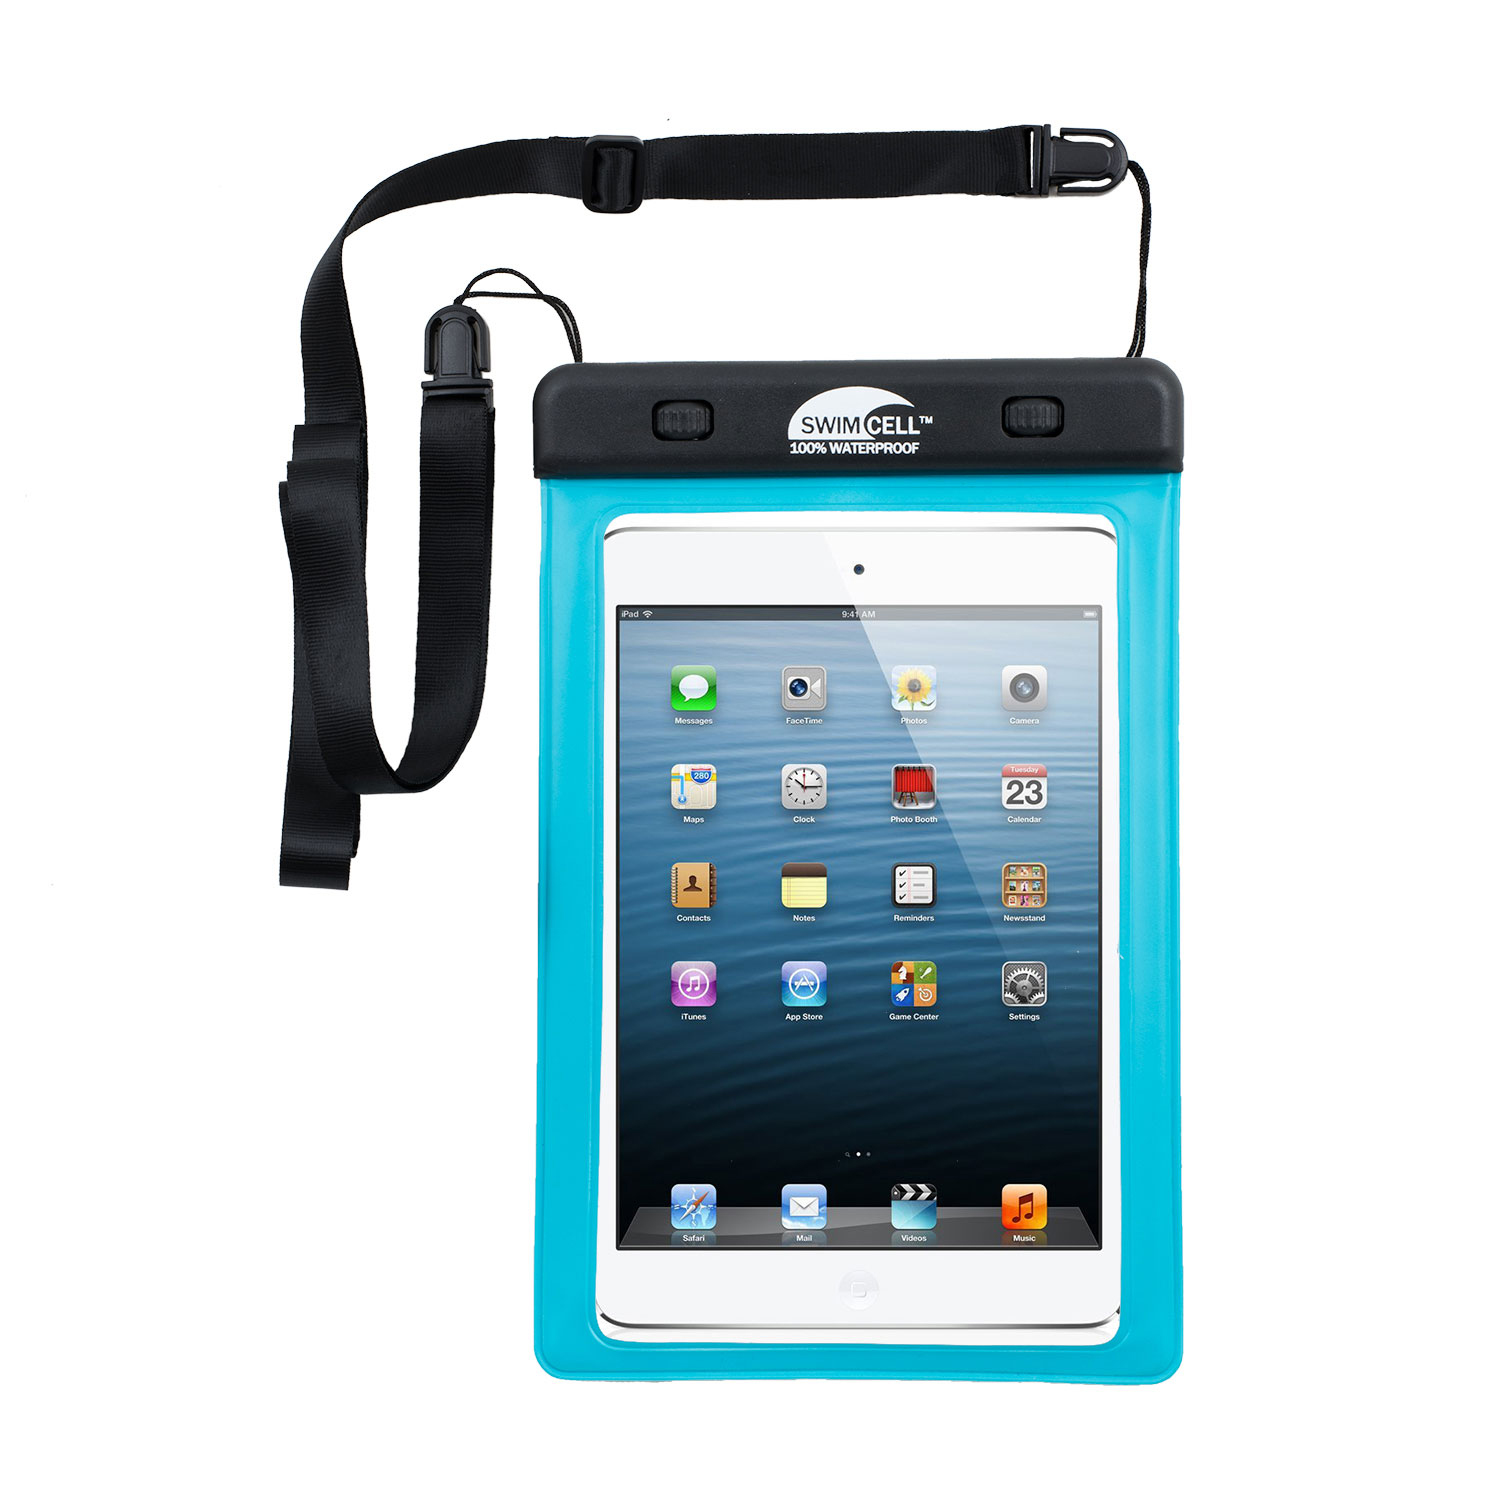 https://www.coastoutdoors.co.uk/images/products/swimcell_100-percent_waterproof_small_tablet_case-blue_fr.jpg